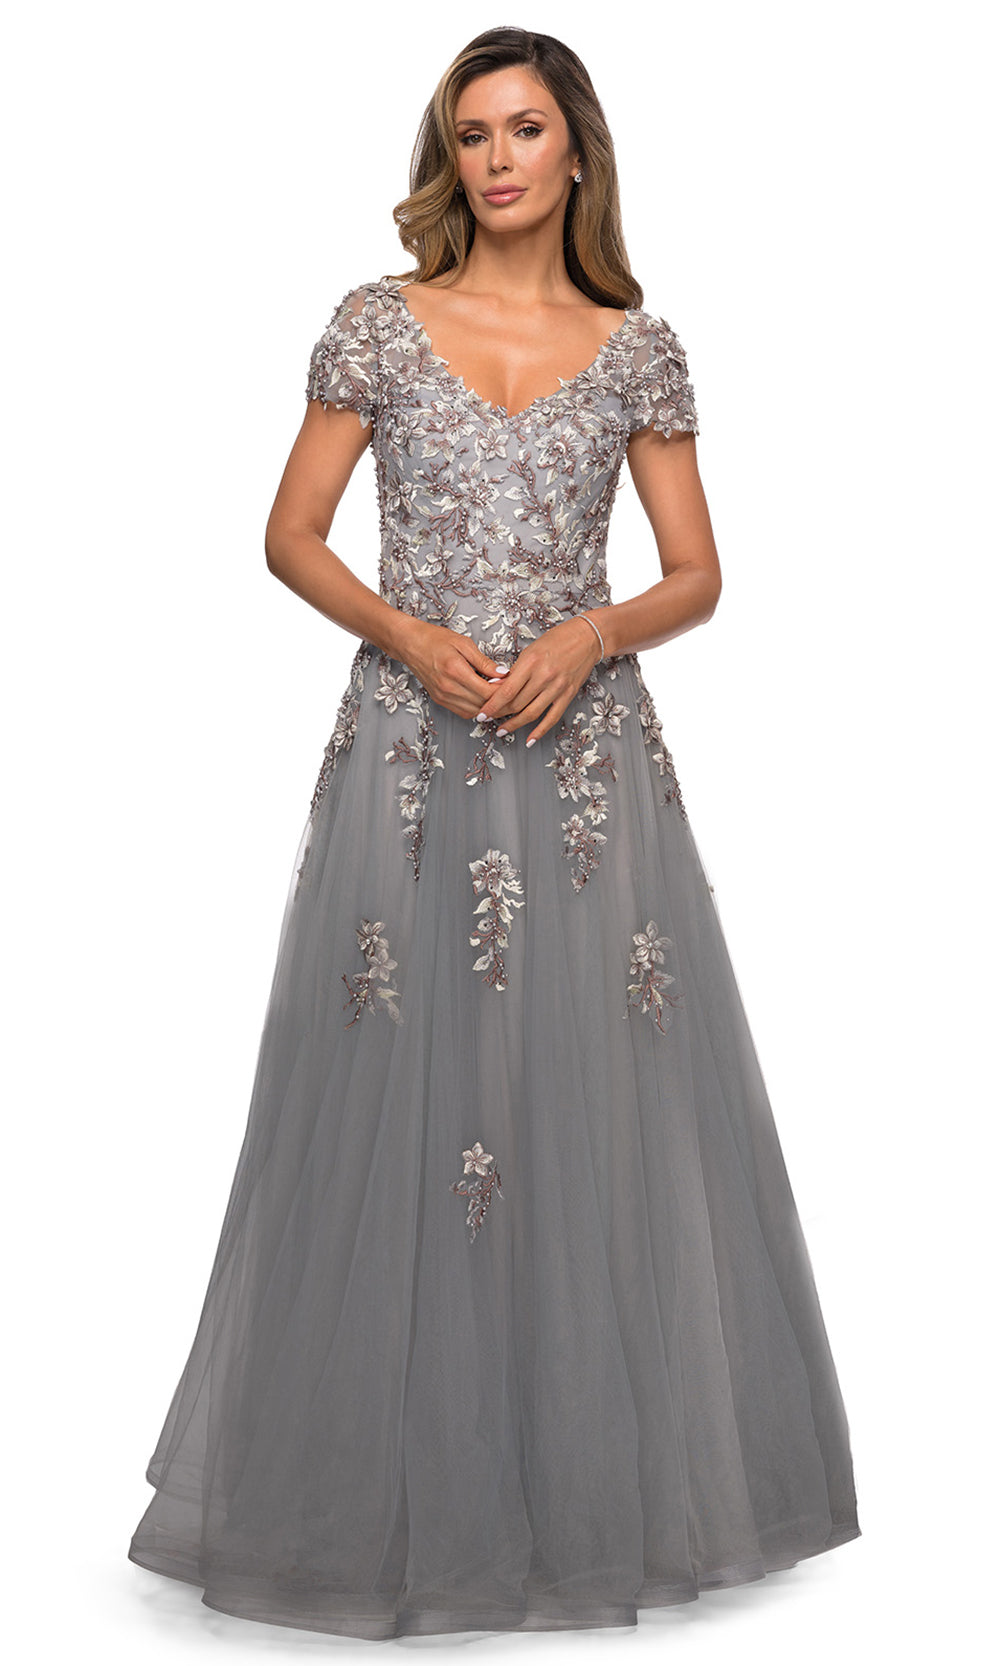 La Femme - 27968 Lace Applique Tulle A-Line Dress In Silver and Gray